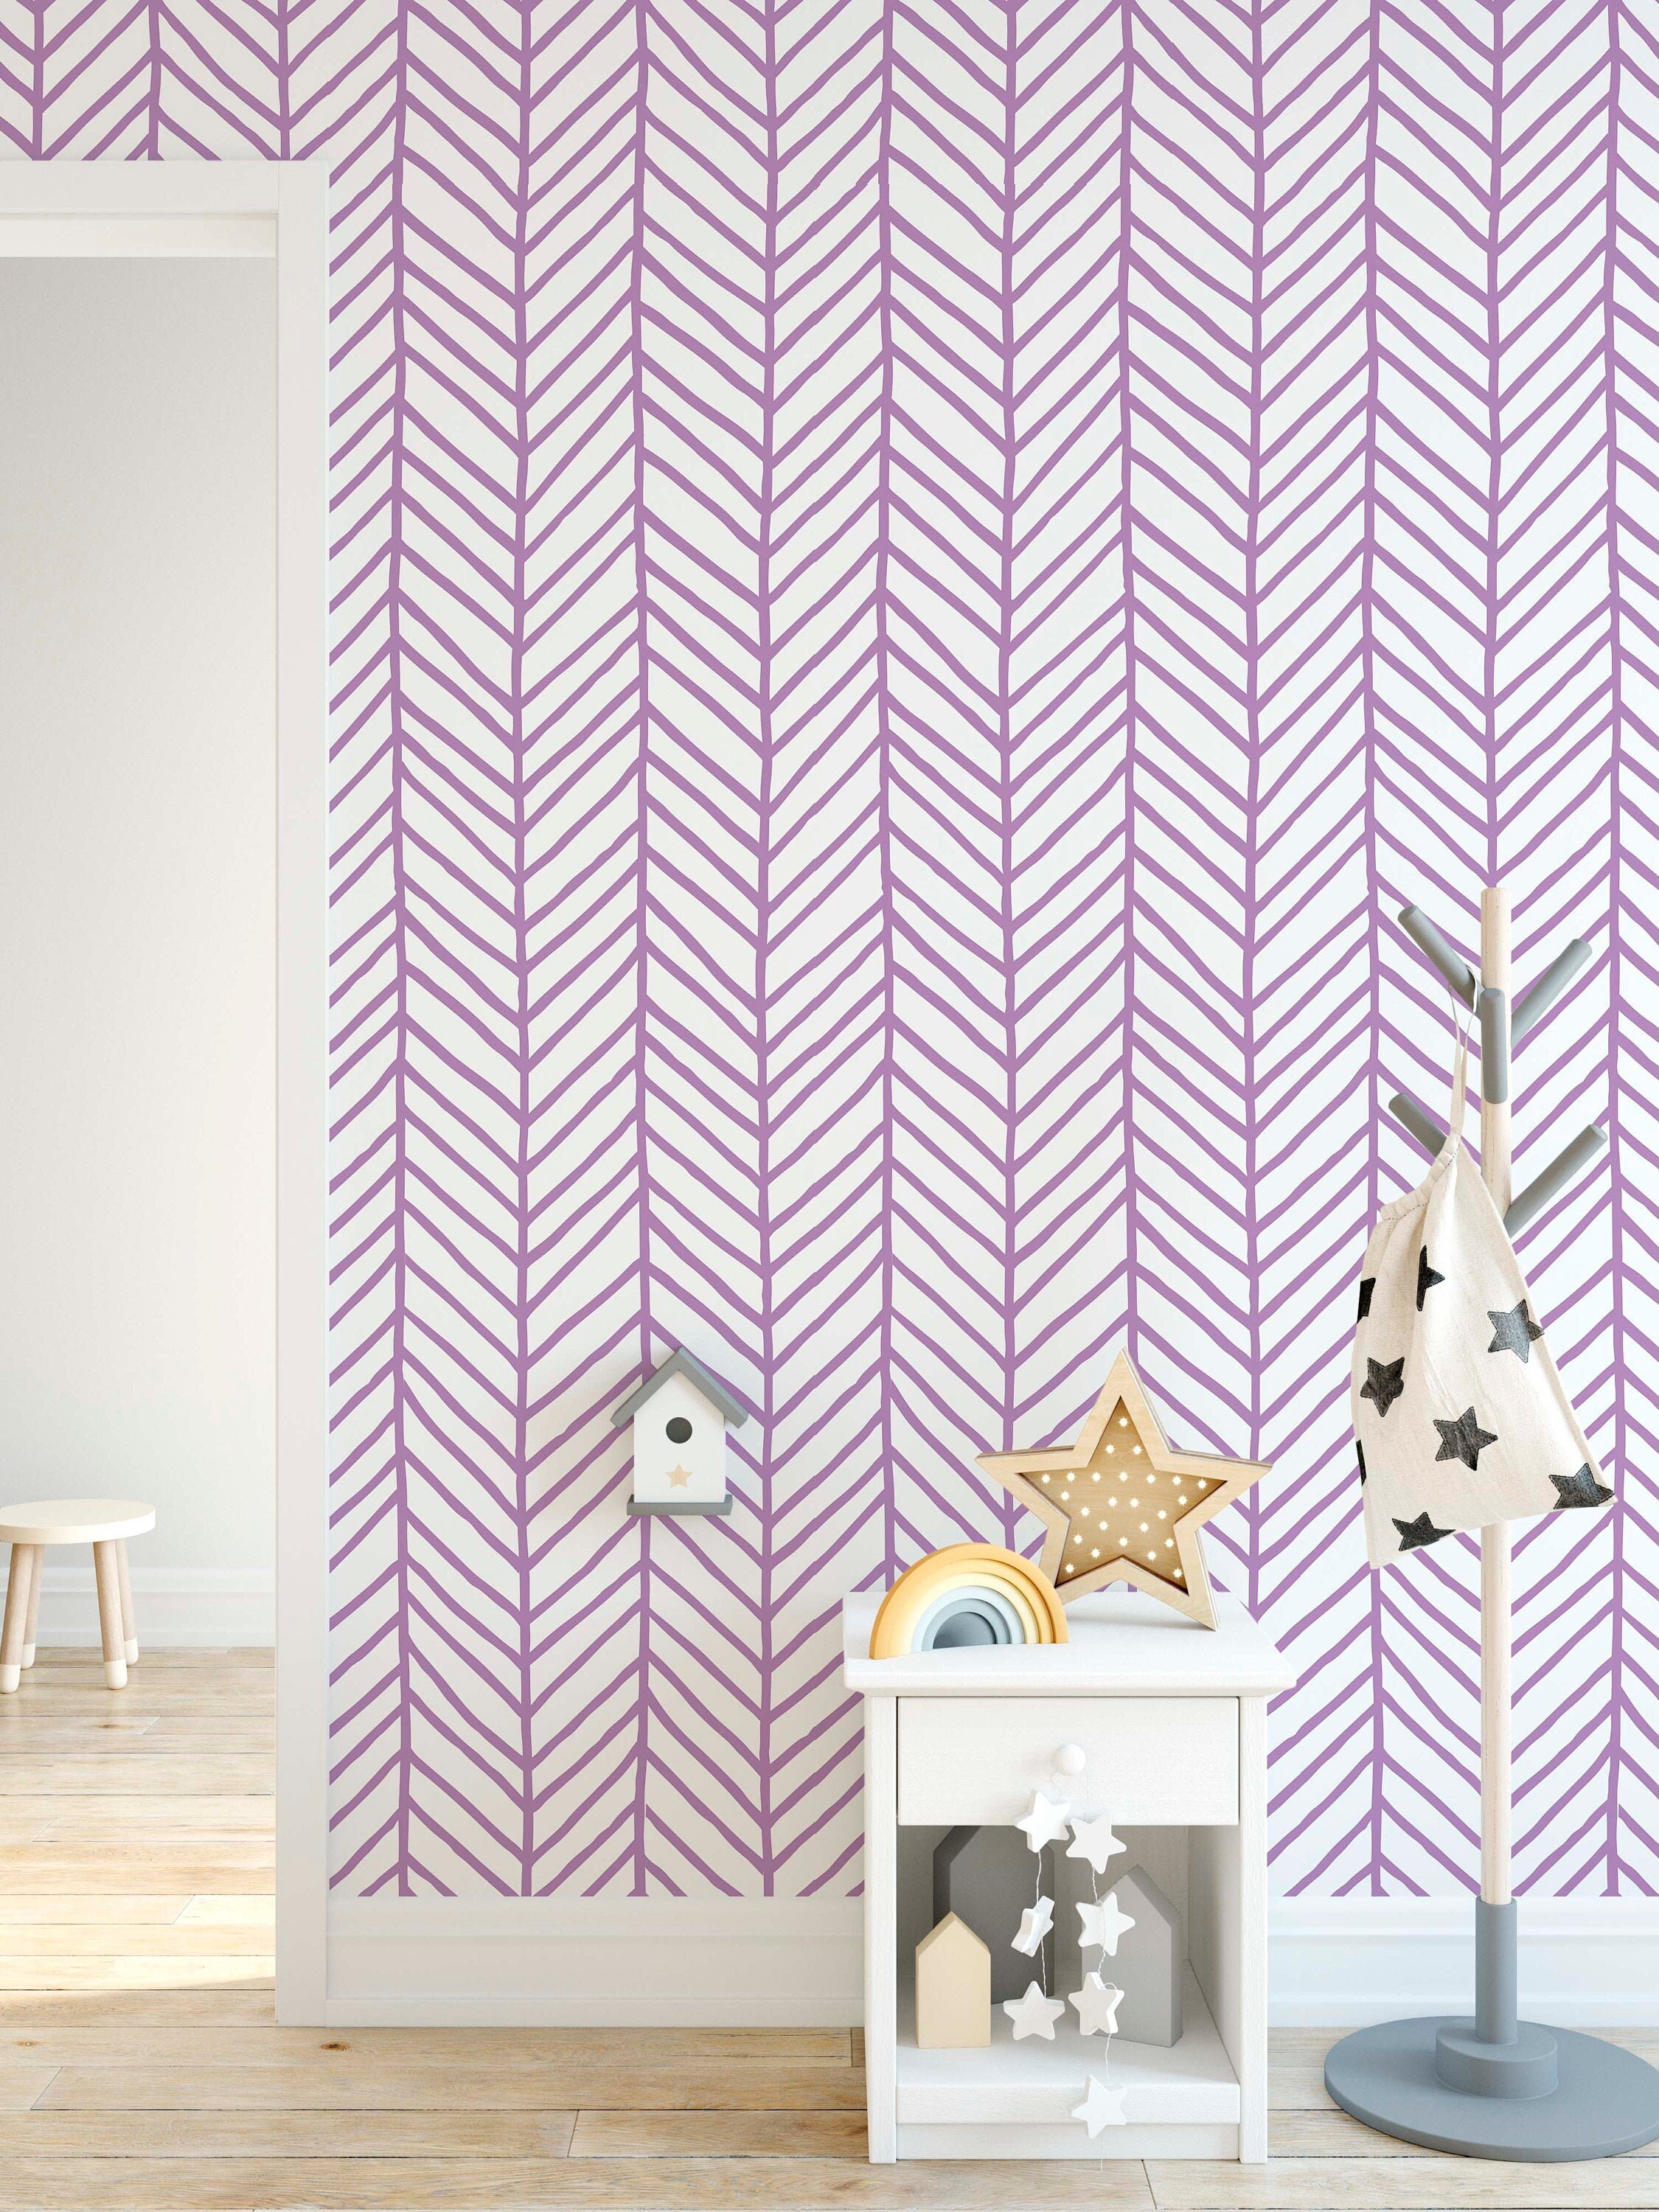 CostaCover Self Adhesive Herringbone Removable Wallpaper with Purple Chevron Hand Drawn Arrows Wall Decal CC132 